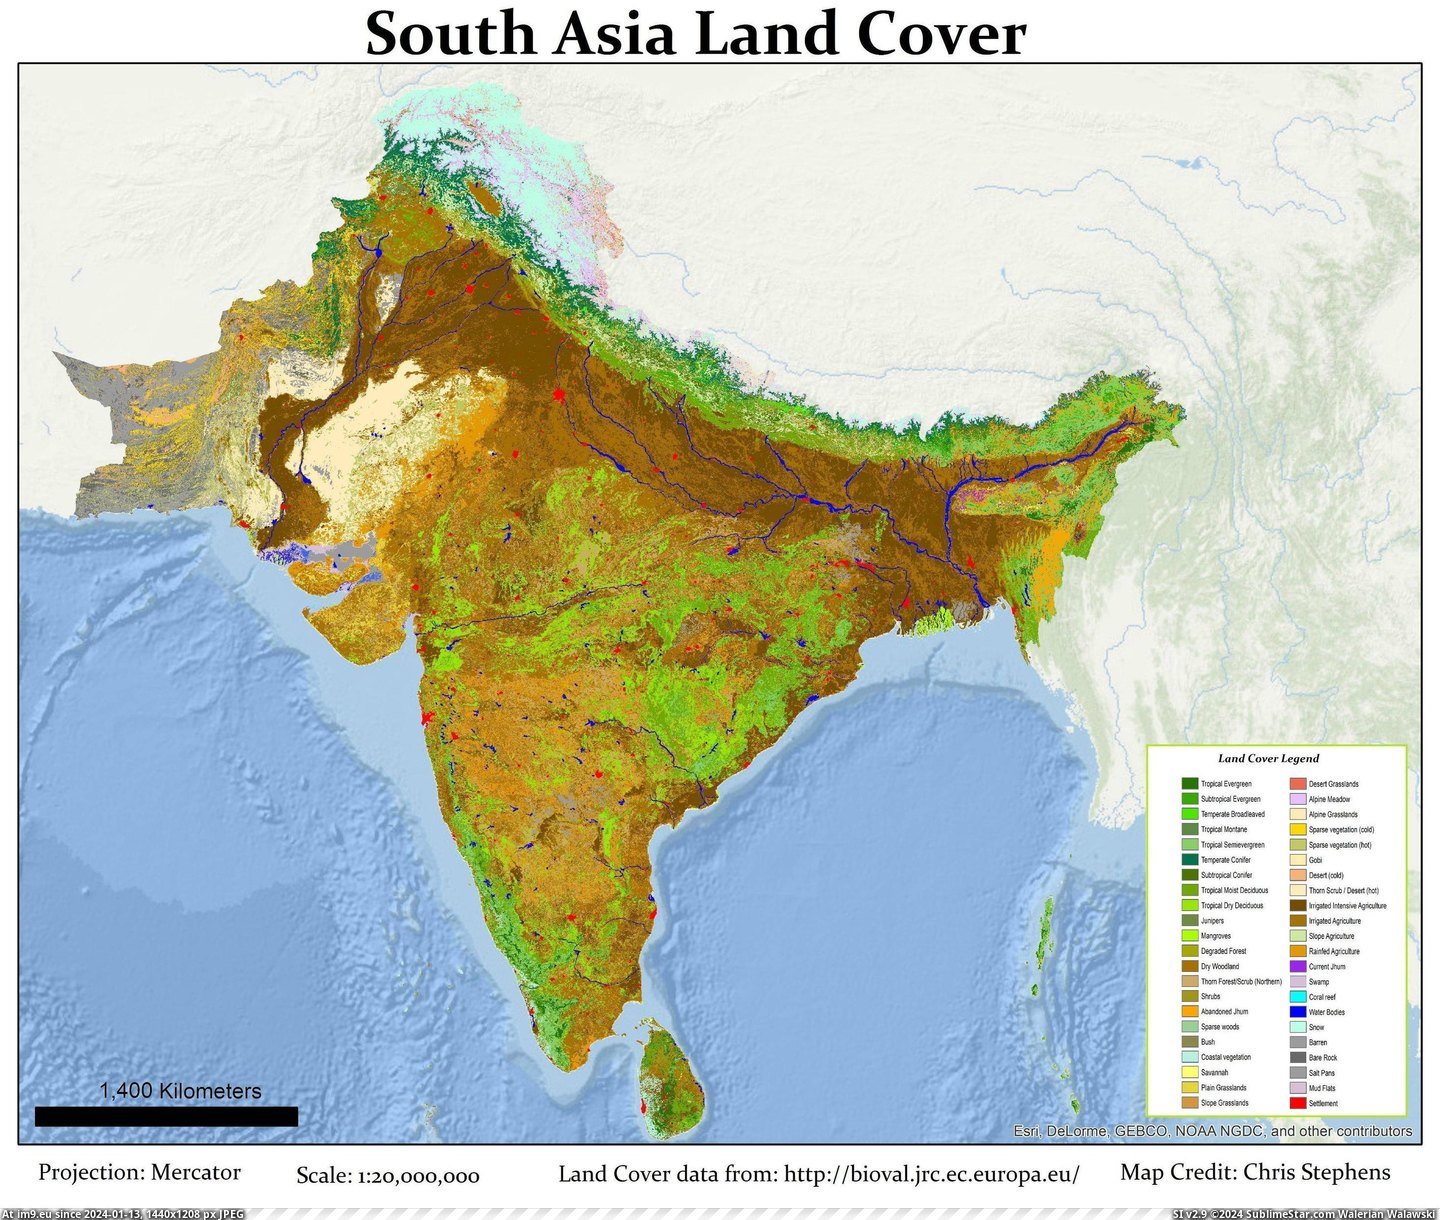 #South #Asia #Land #Cover [Mapporn] South Asia Land Cover [2930x2469] Pic. (Bild von album My r/MAPS favs))